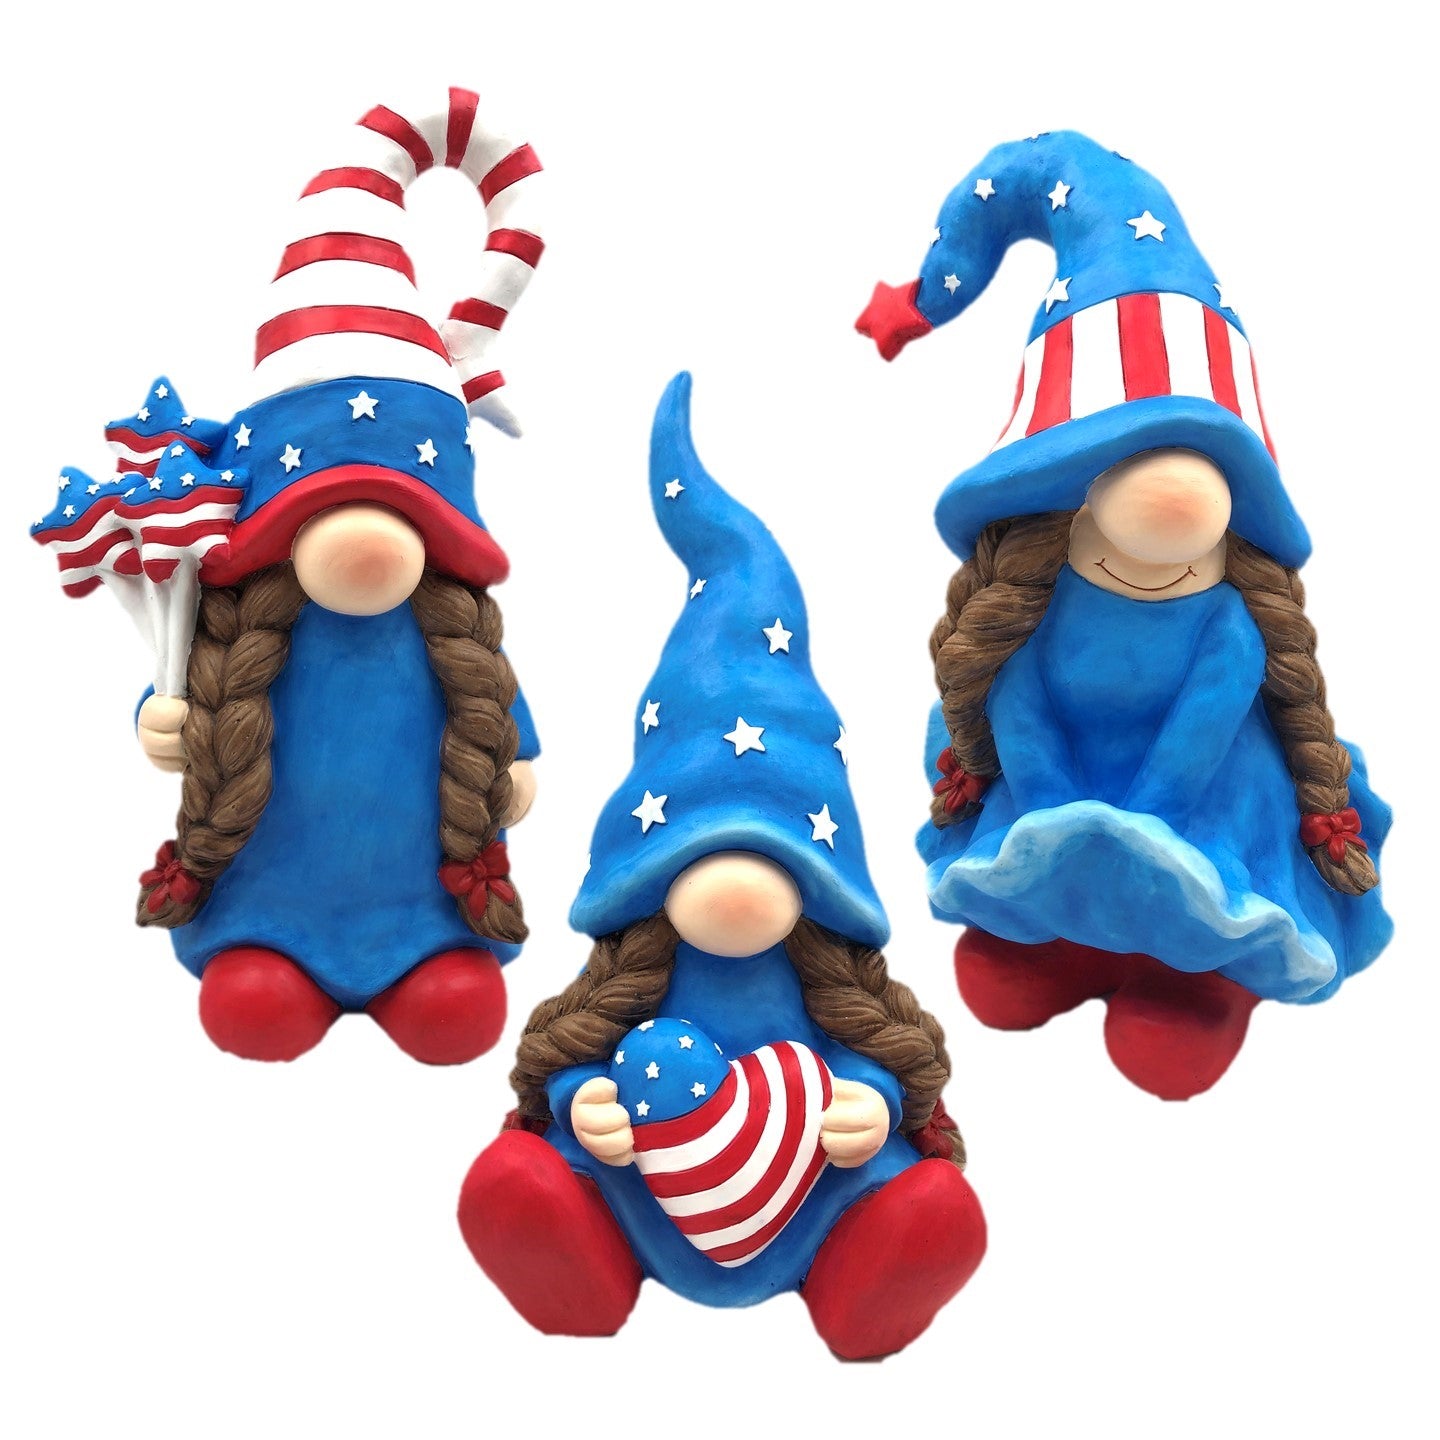 The Americanas Set of 3 Assorted American Lady Patriot Garden Gnomes